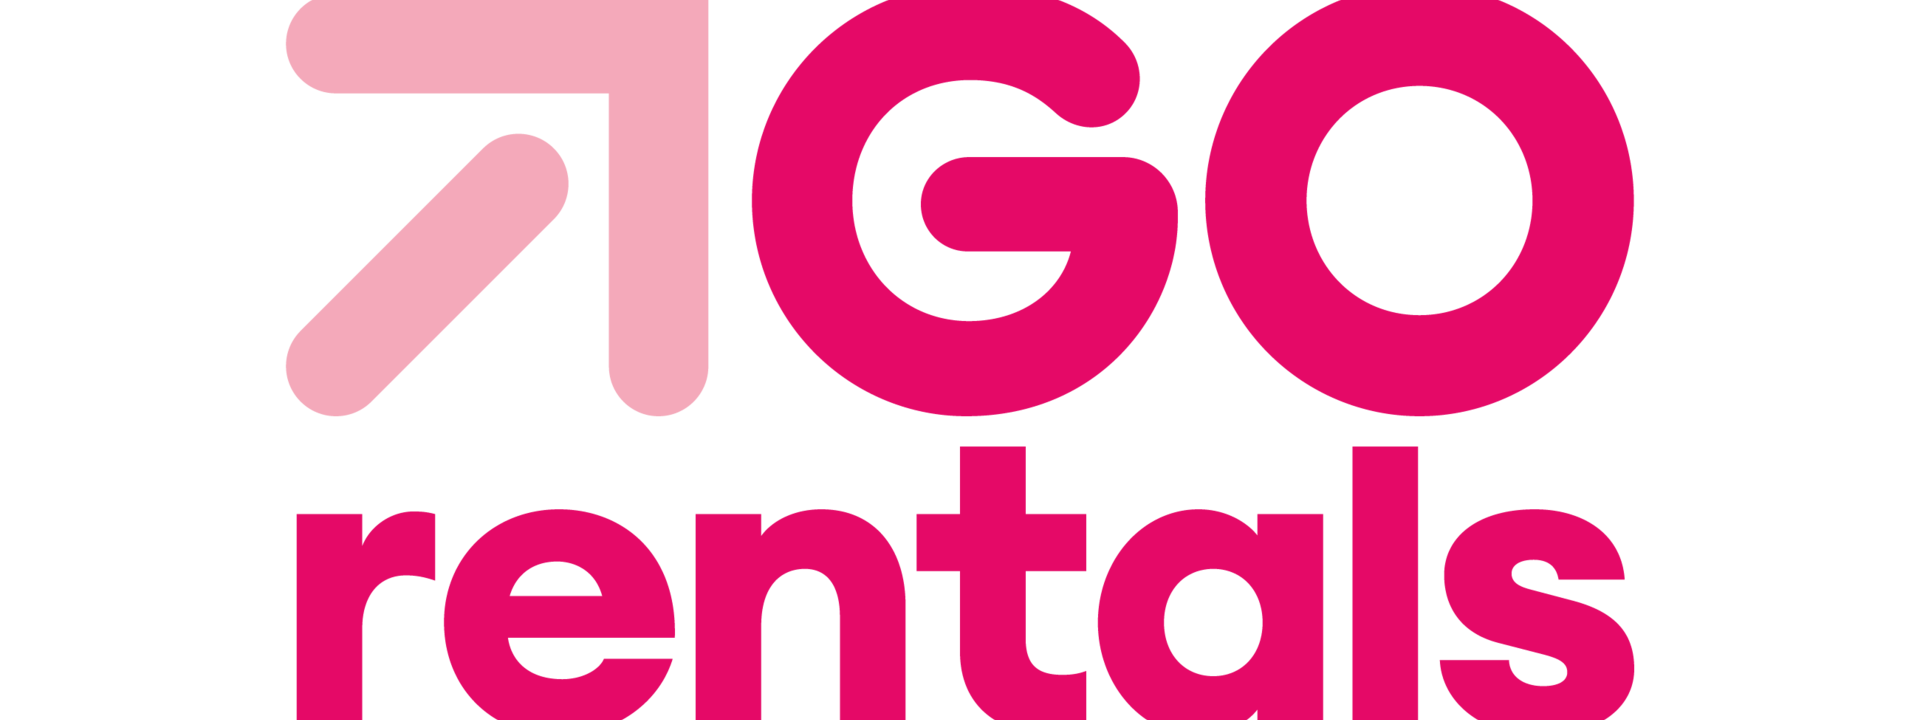 GORE1005_GORentals_Logo_Pink_AW_STACK SMALL_6.png